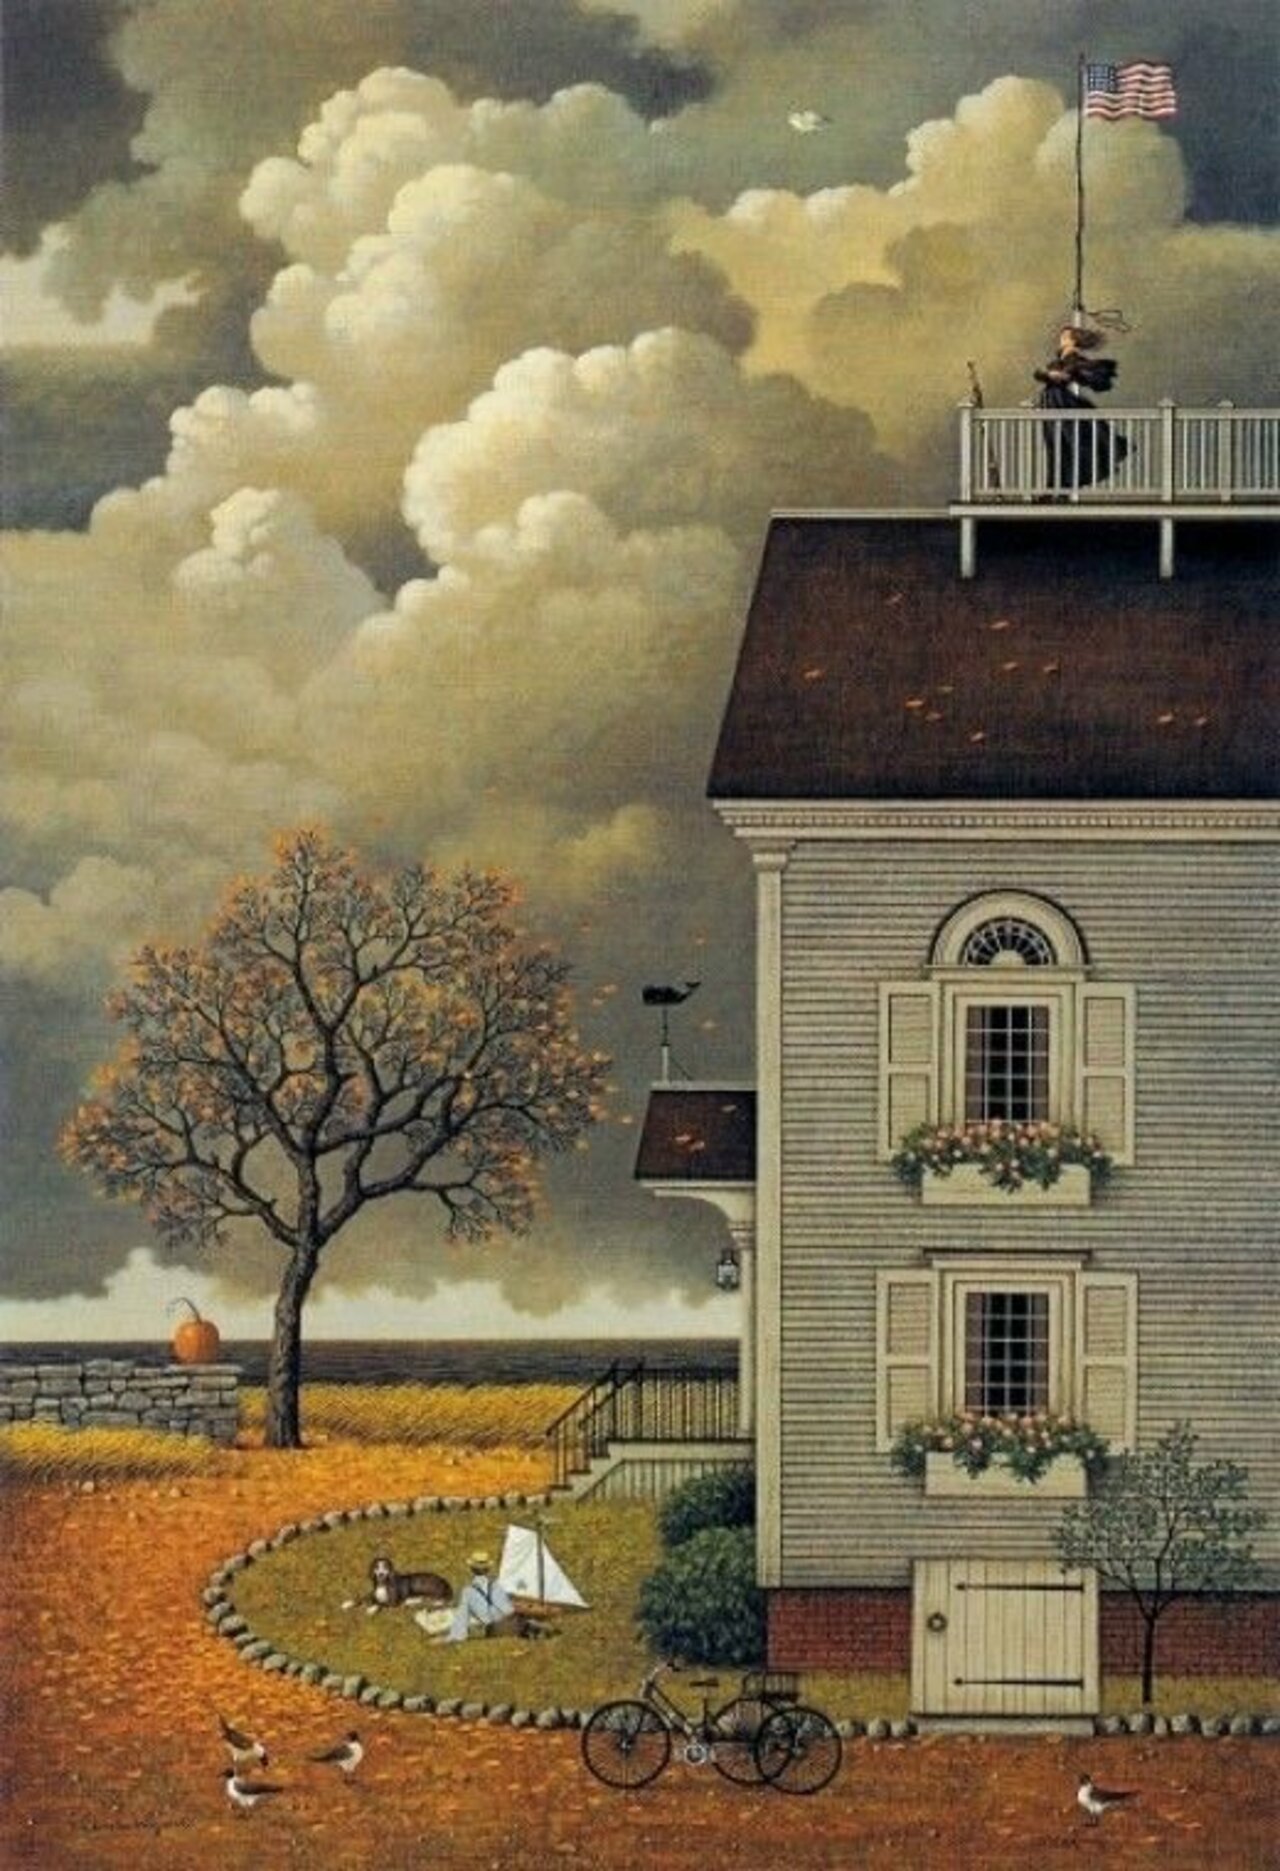 RT @HWarlow: I enjoy looking at pictures by the artist Charles Wysocki 1928-2002 painter who is well loved for his Naive art. https://t.co/93vErN5uYZ